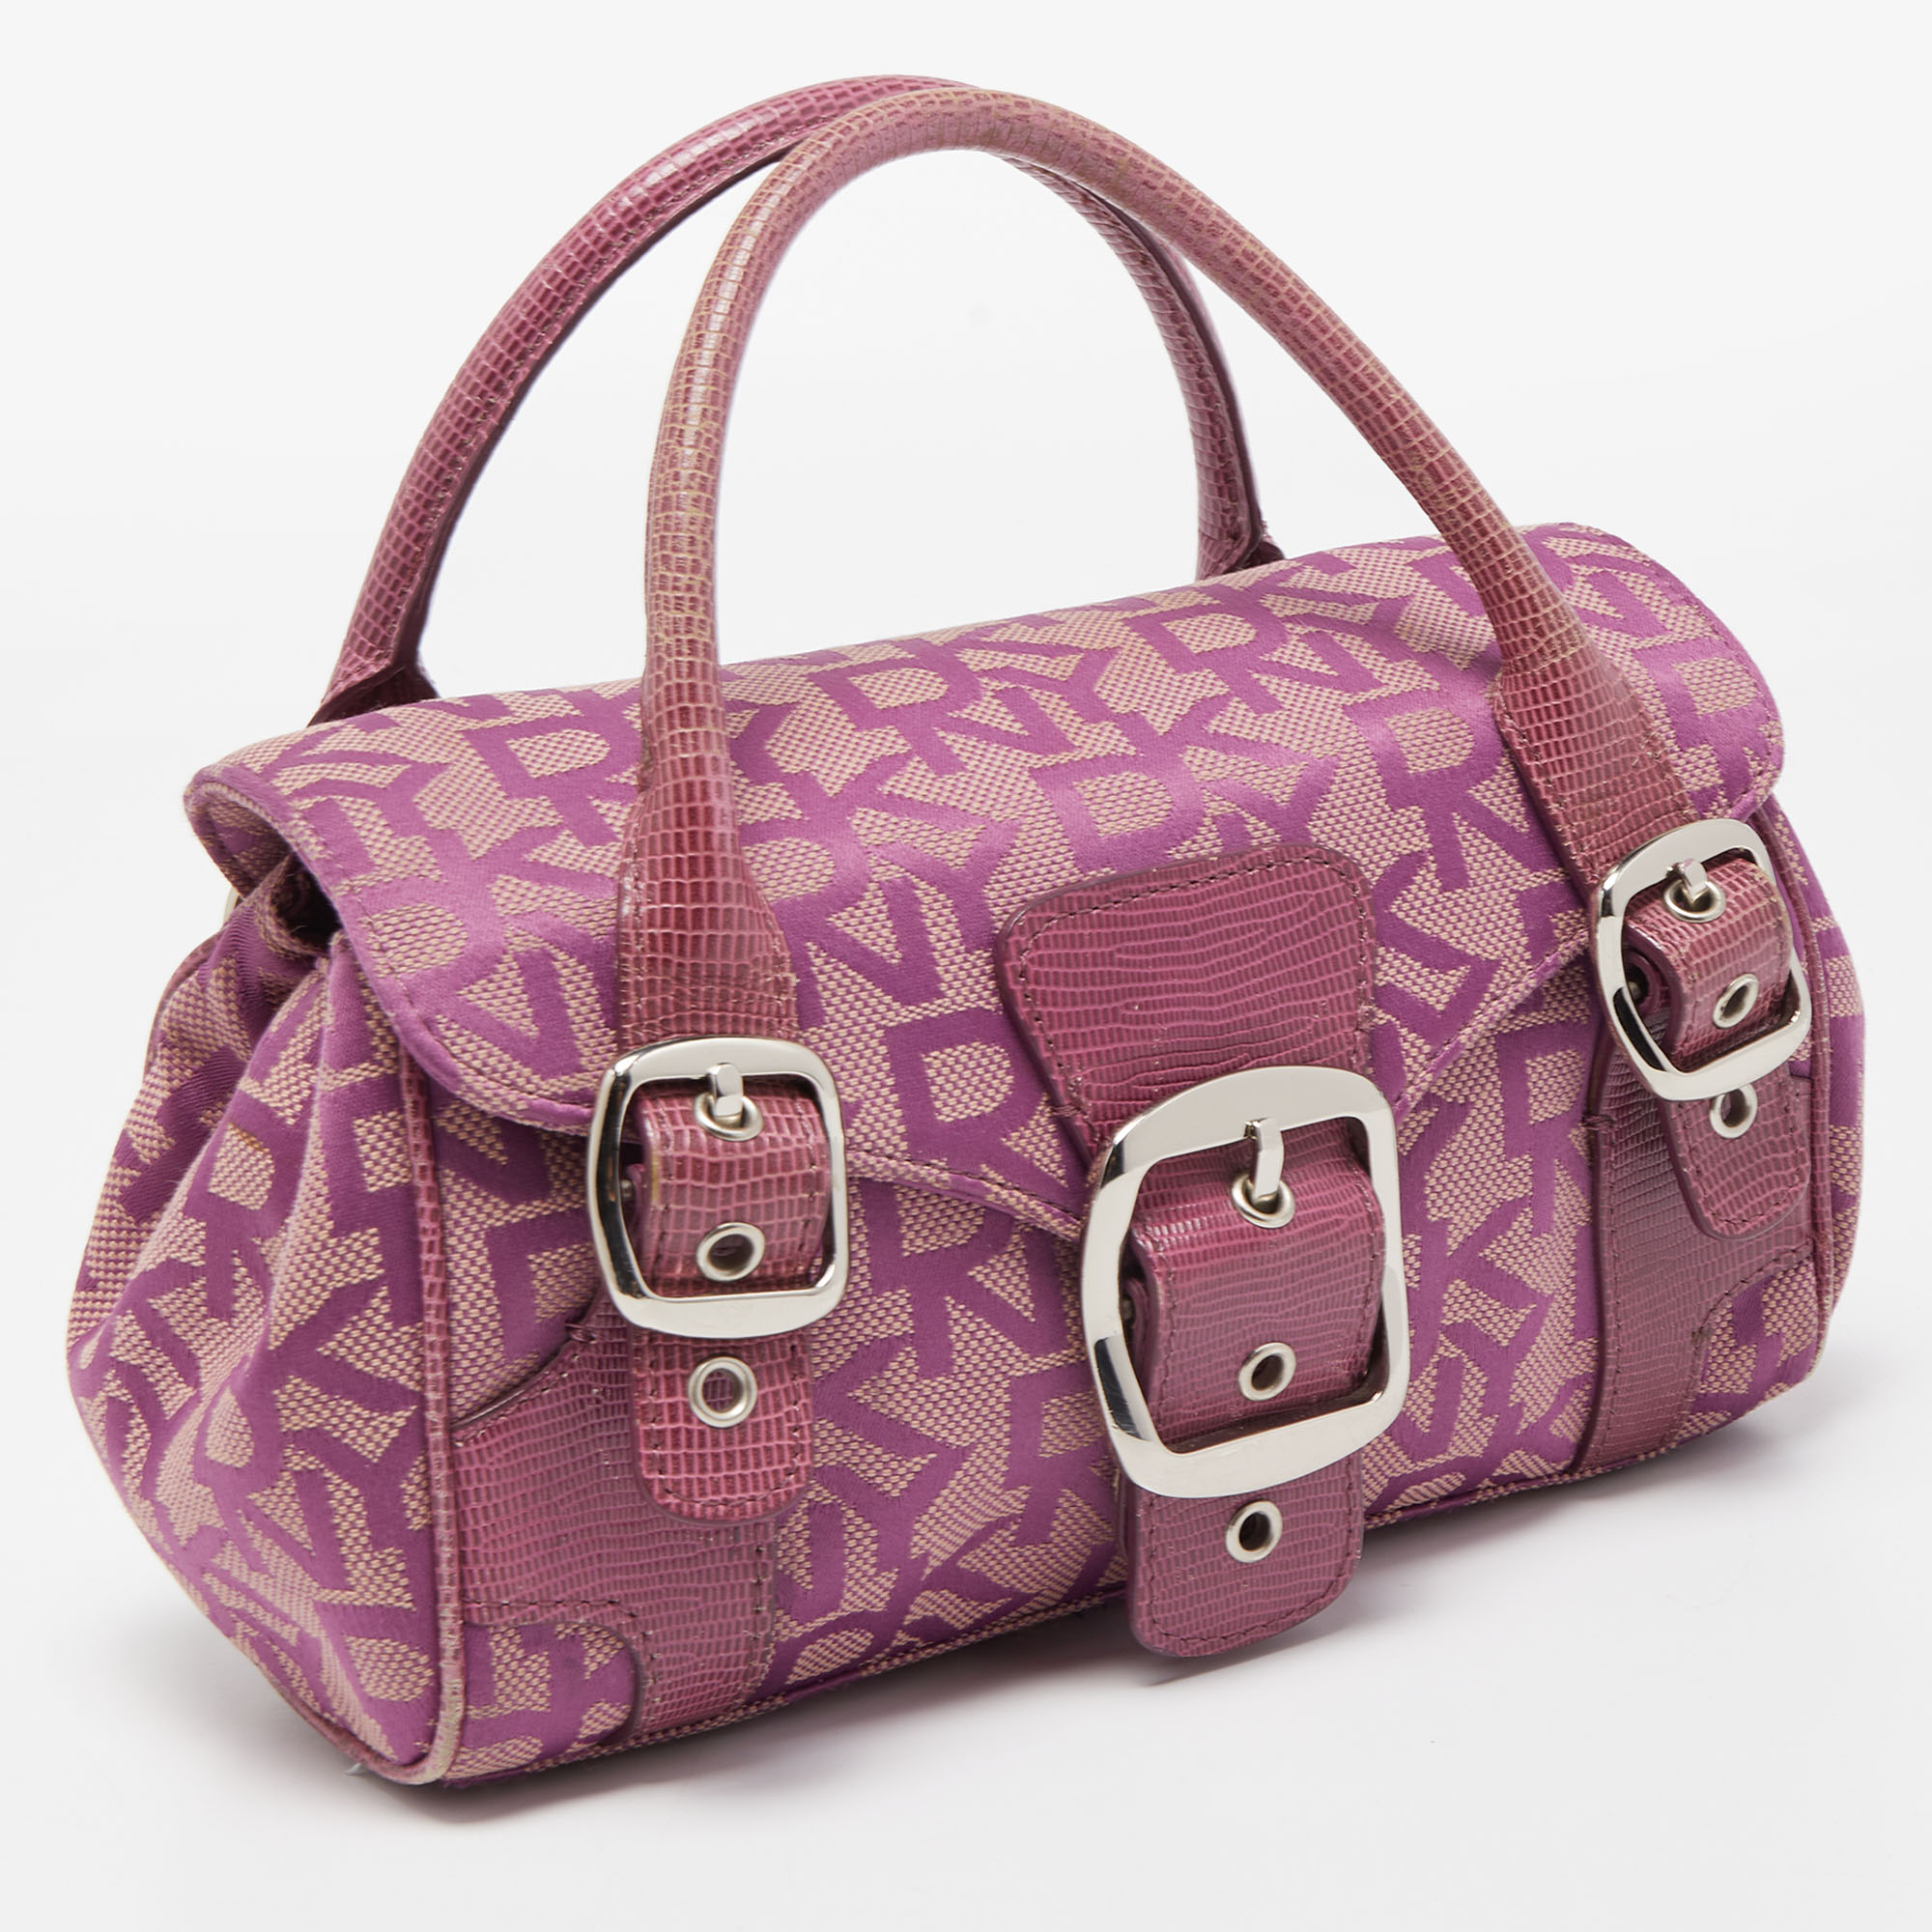 Dkny Magenta Signature Canvas And Lizard Embossed Leather Buckle Flap Satchel